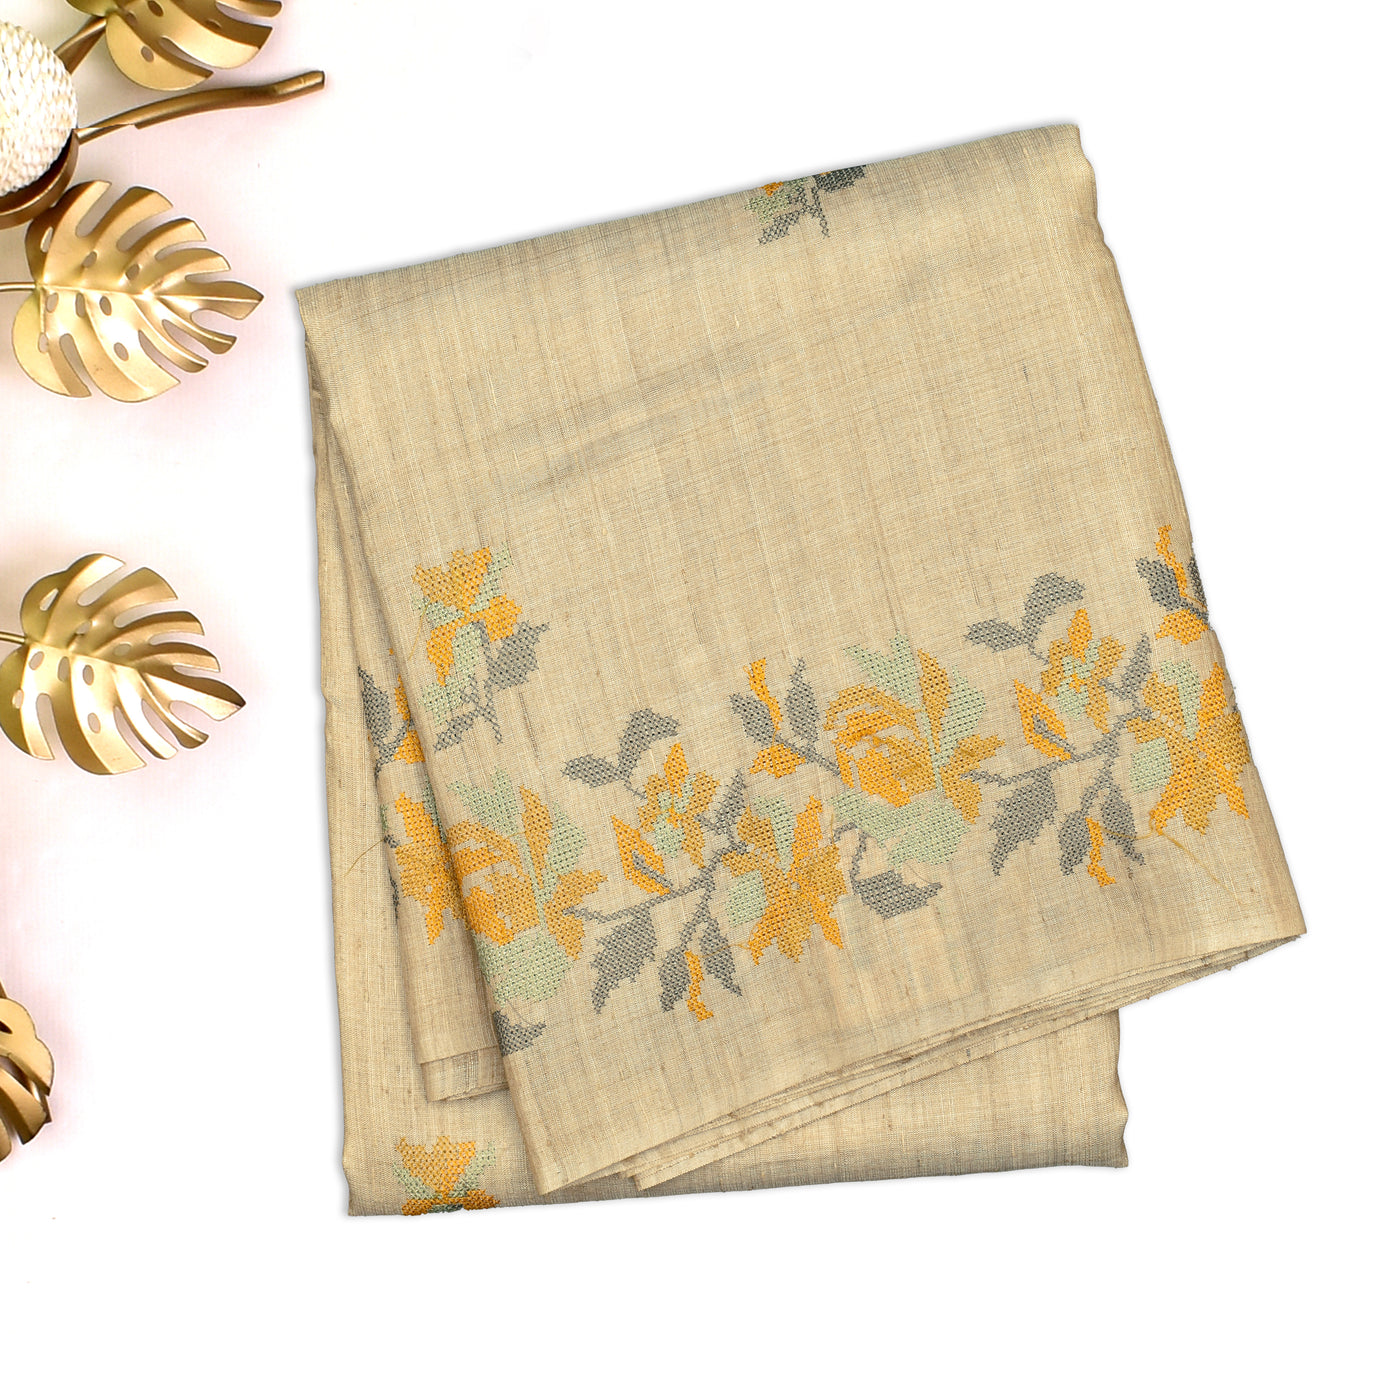 Off White Tussar Silk Saree with Flower Embroidery Design